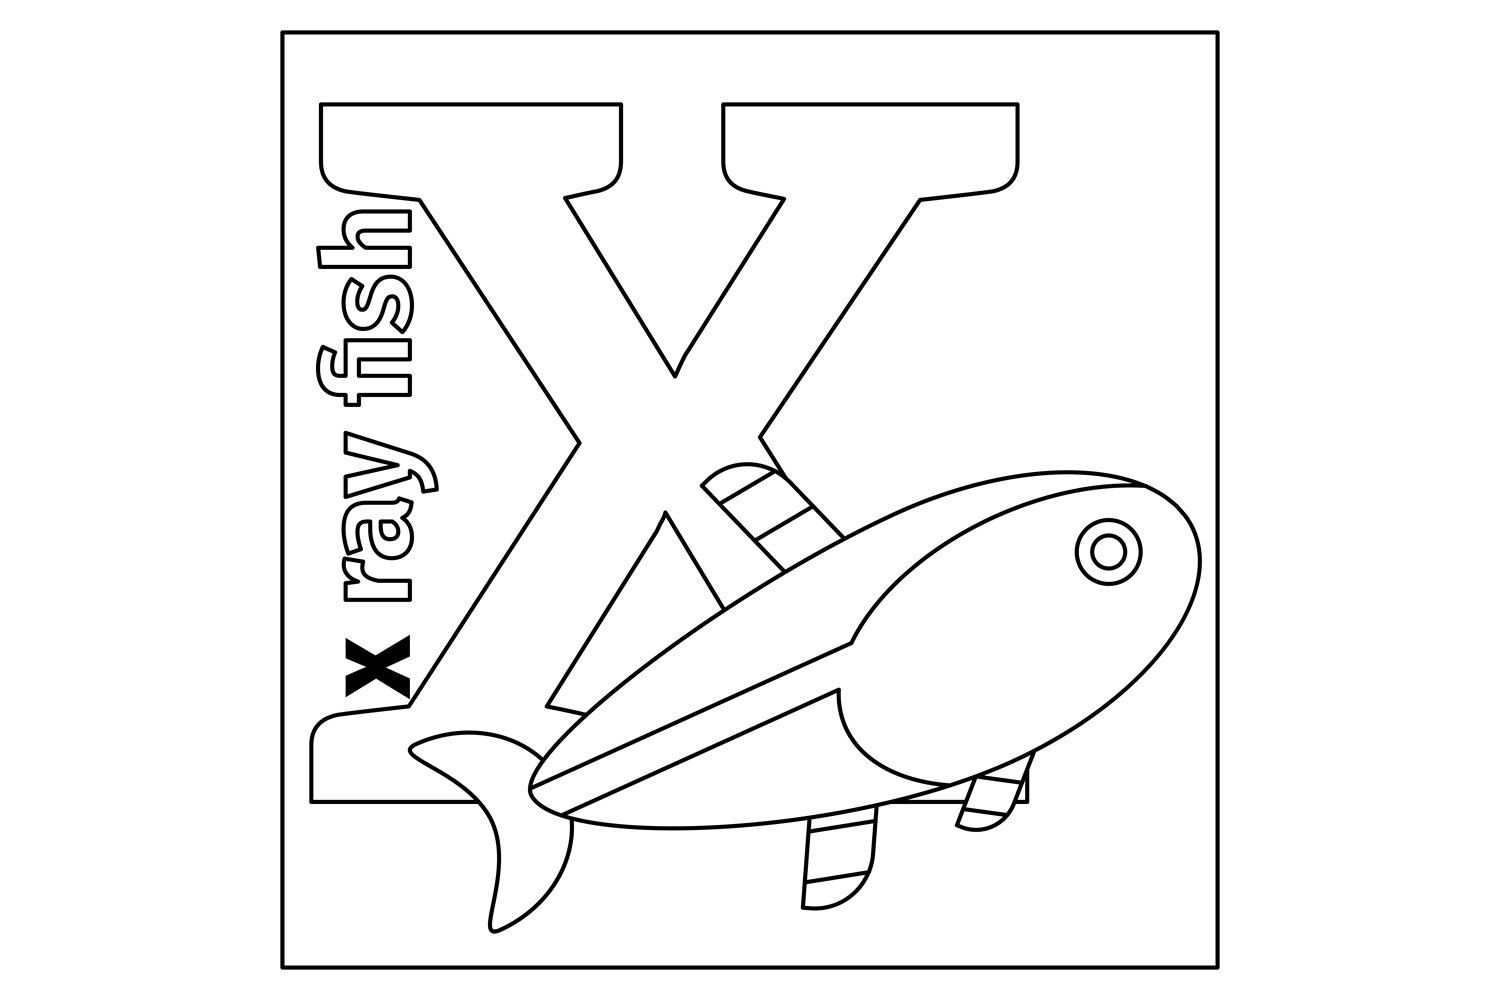 Letter X coloring page